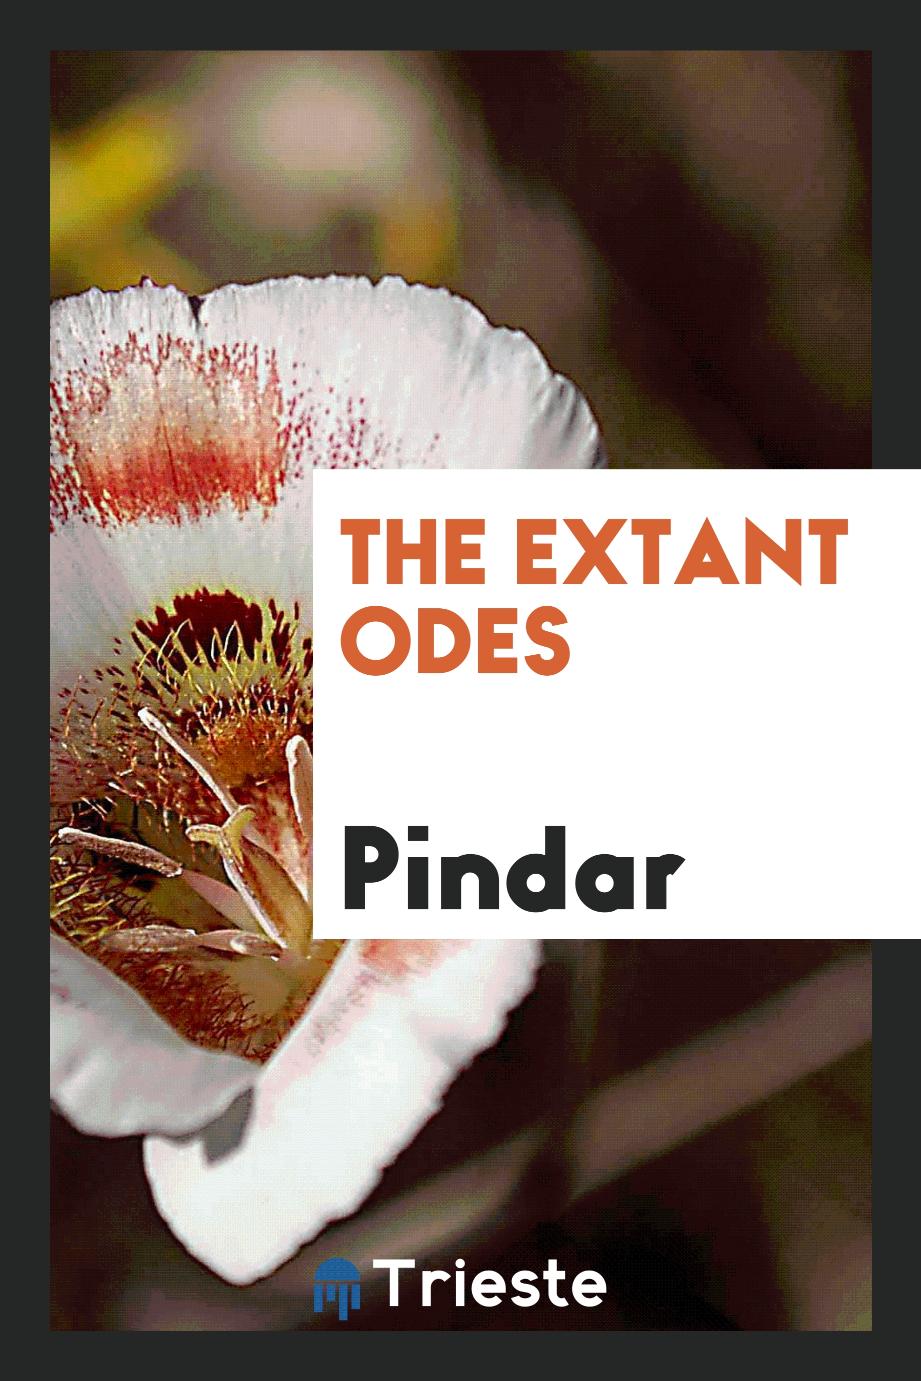 The extant odes